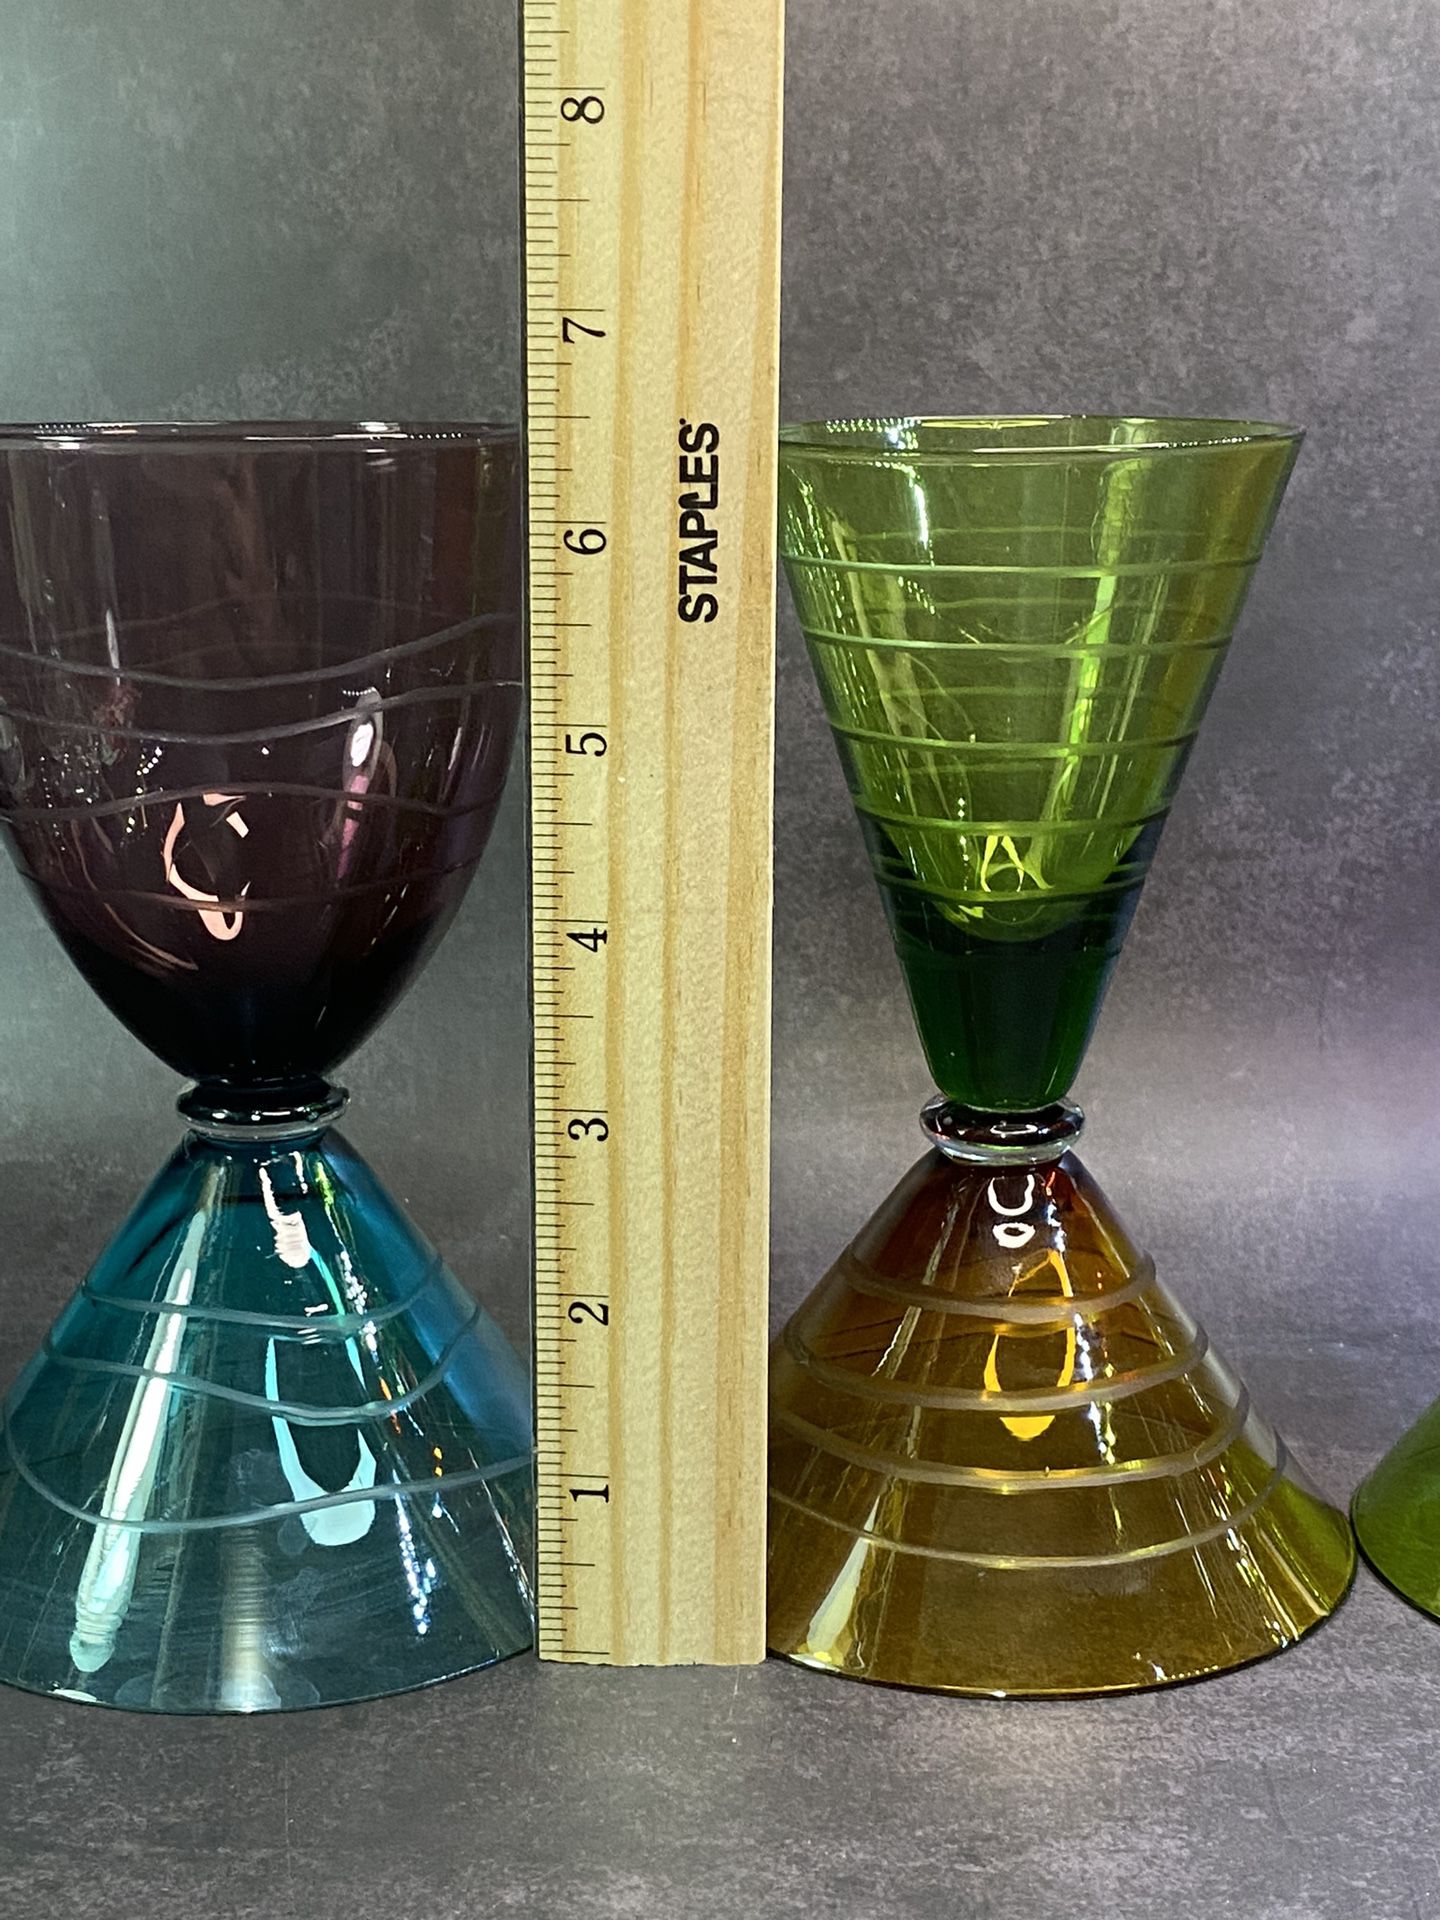 Set of (2) Vintage, Jewel Colored, Double Sided Martini/Wine Glasses, Etched Mid Century Cocktail Art Glass. 